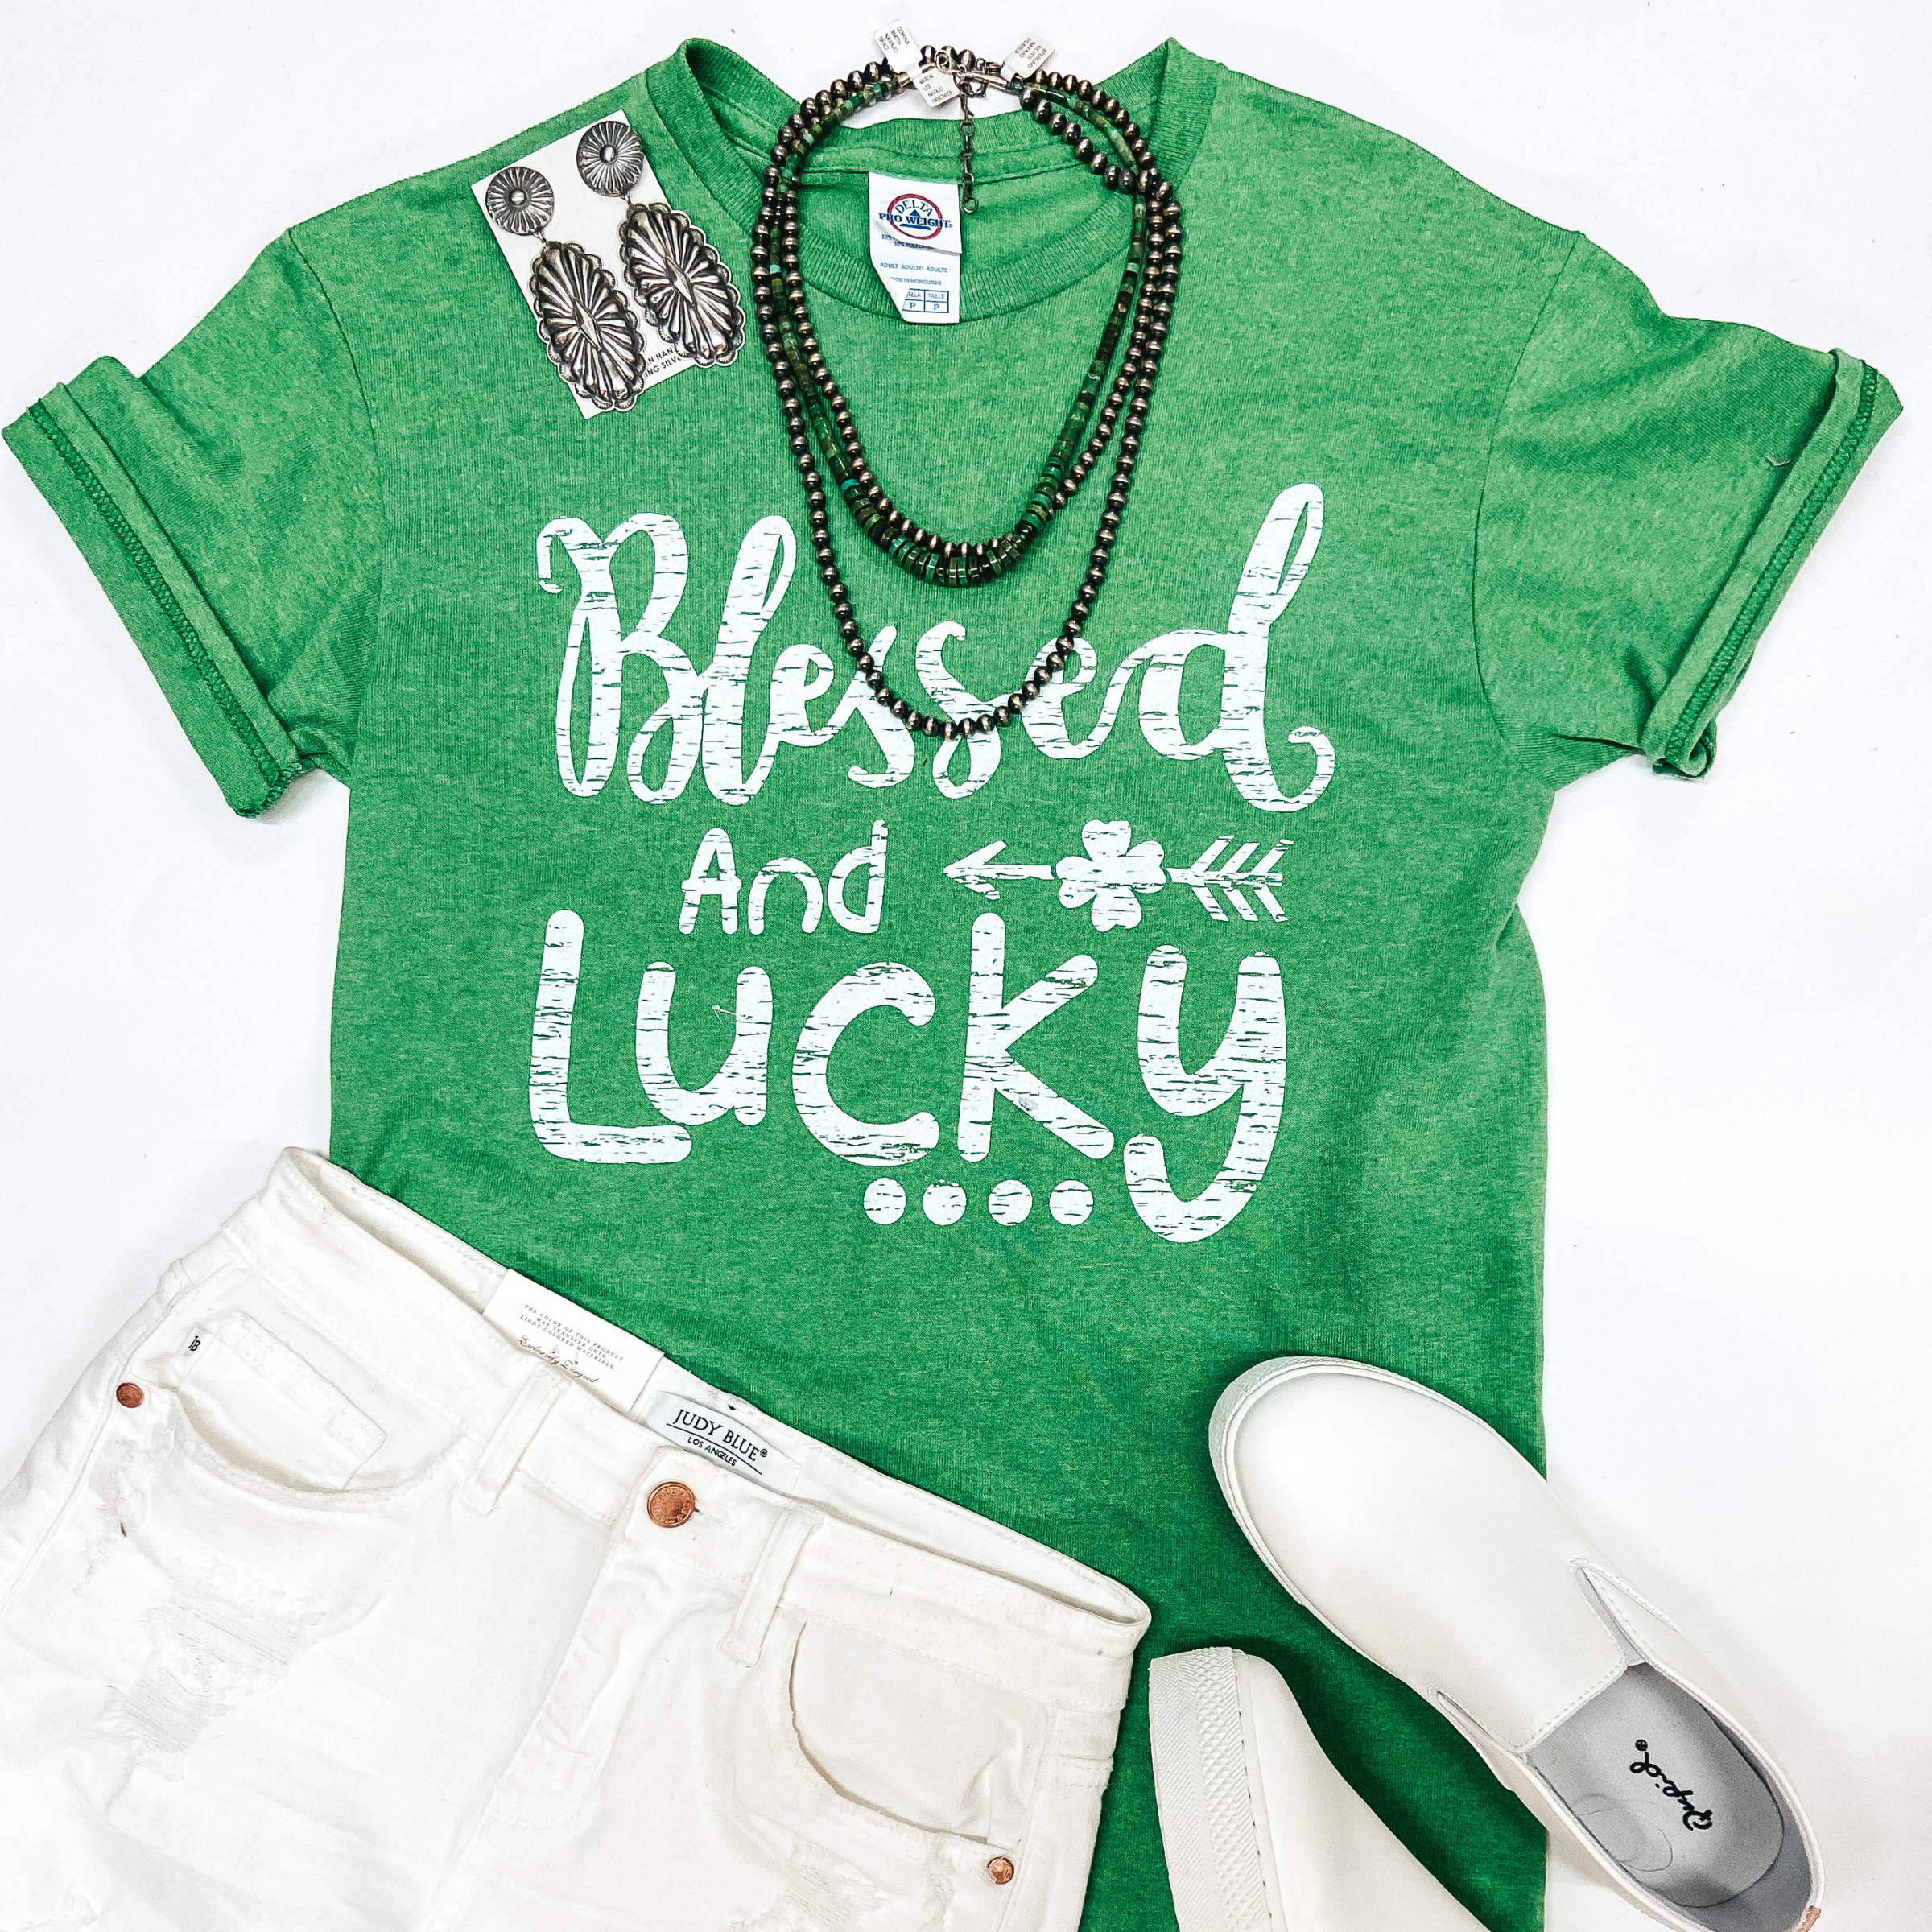 A green graphic tee that says "Blessed and Lucky" with an arrow and clover. Pictured with white shorts, sneakers, and silver jewelry.